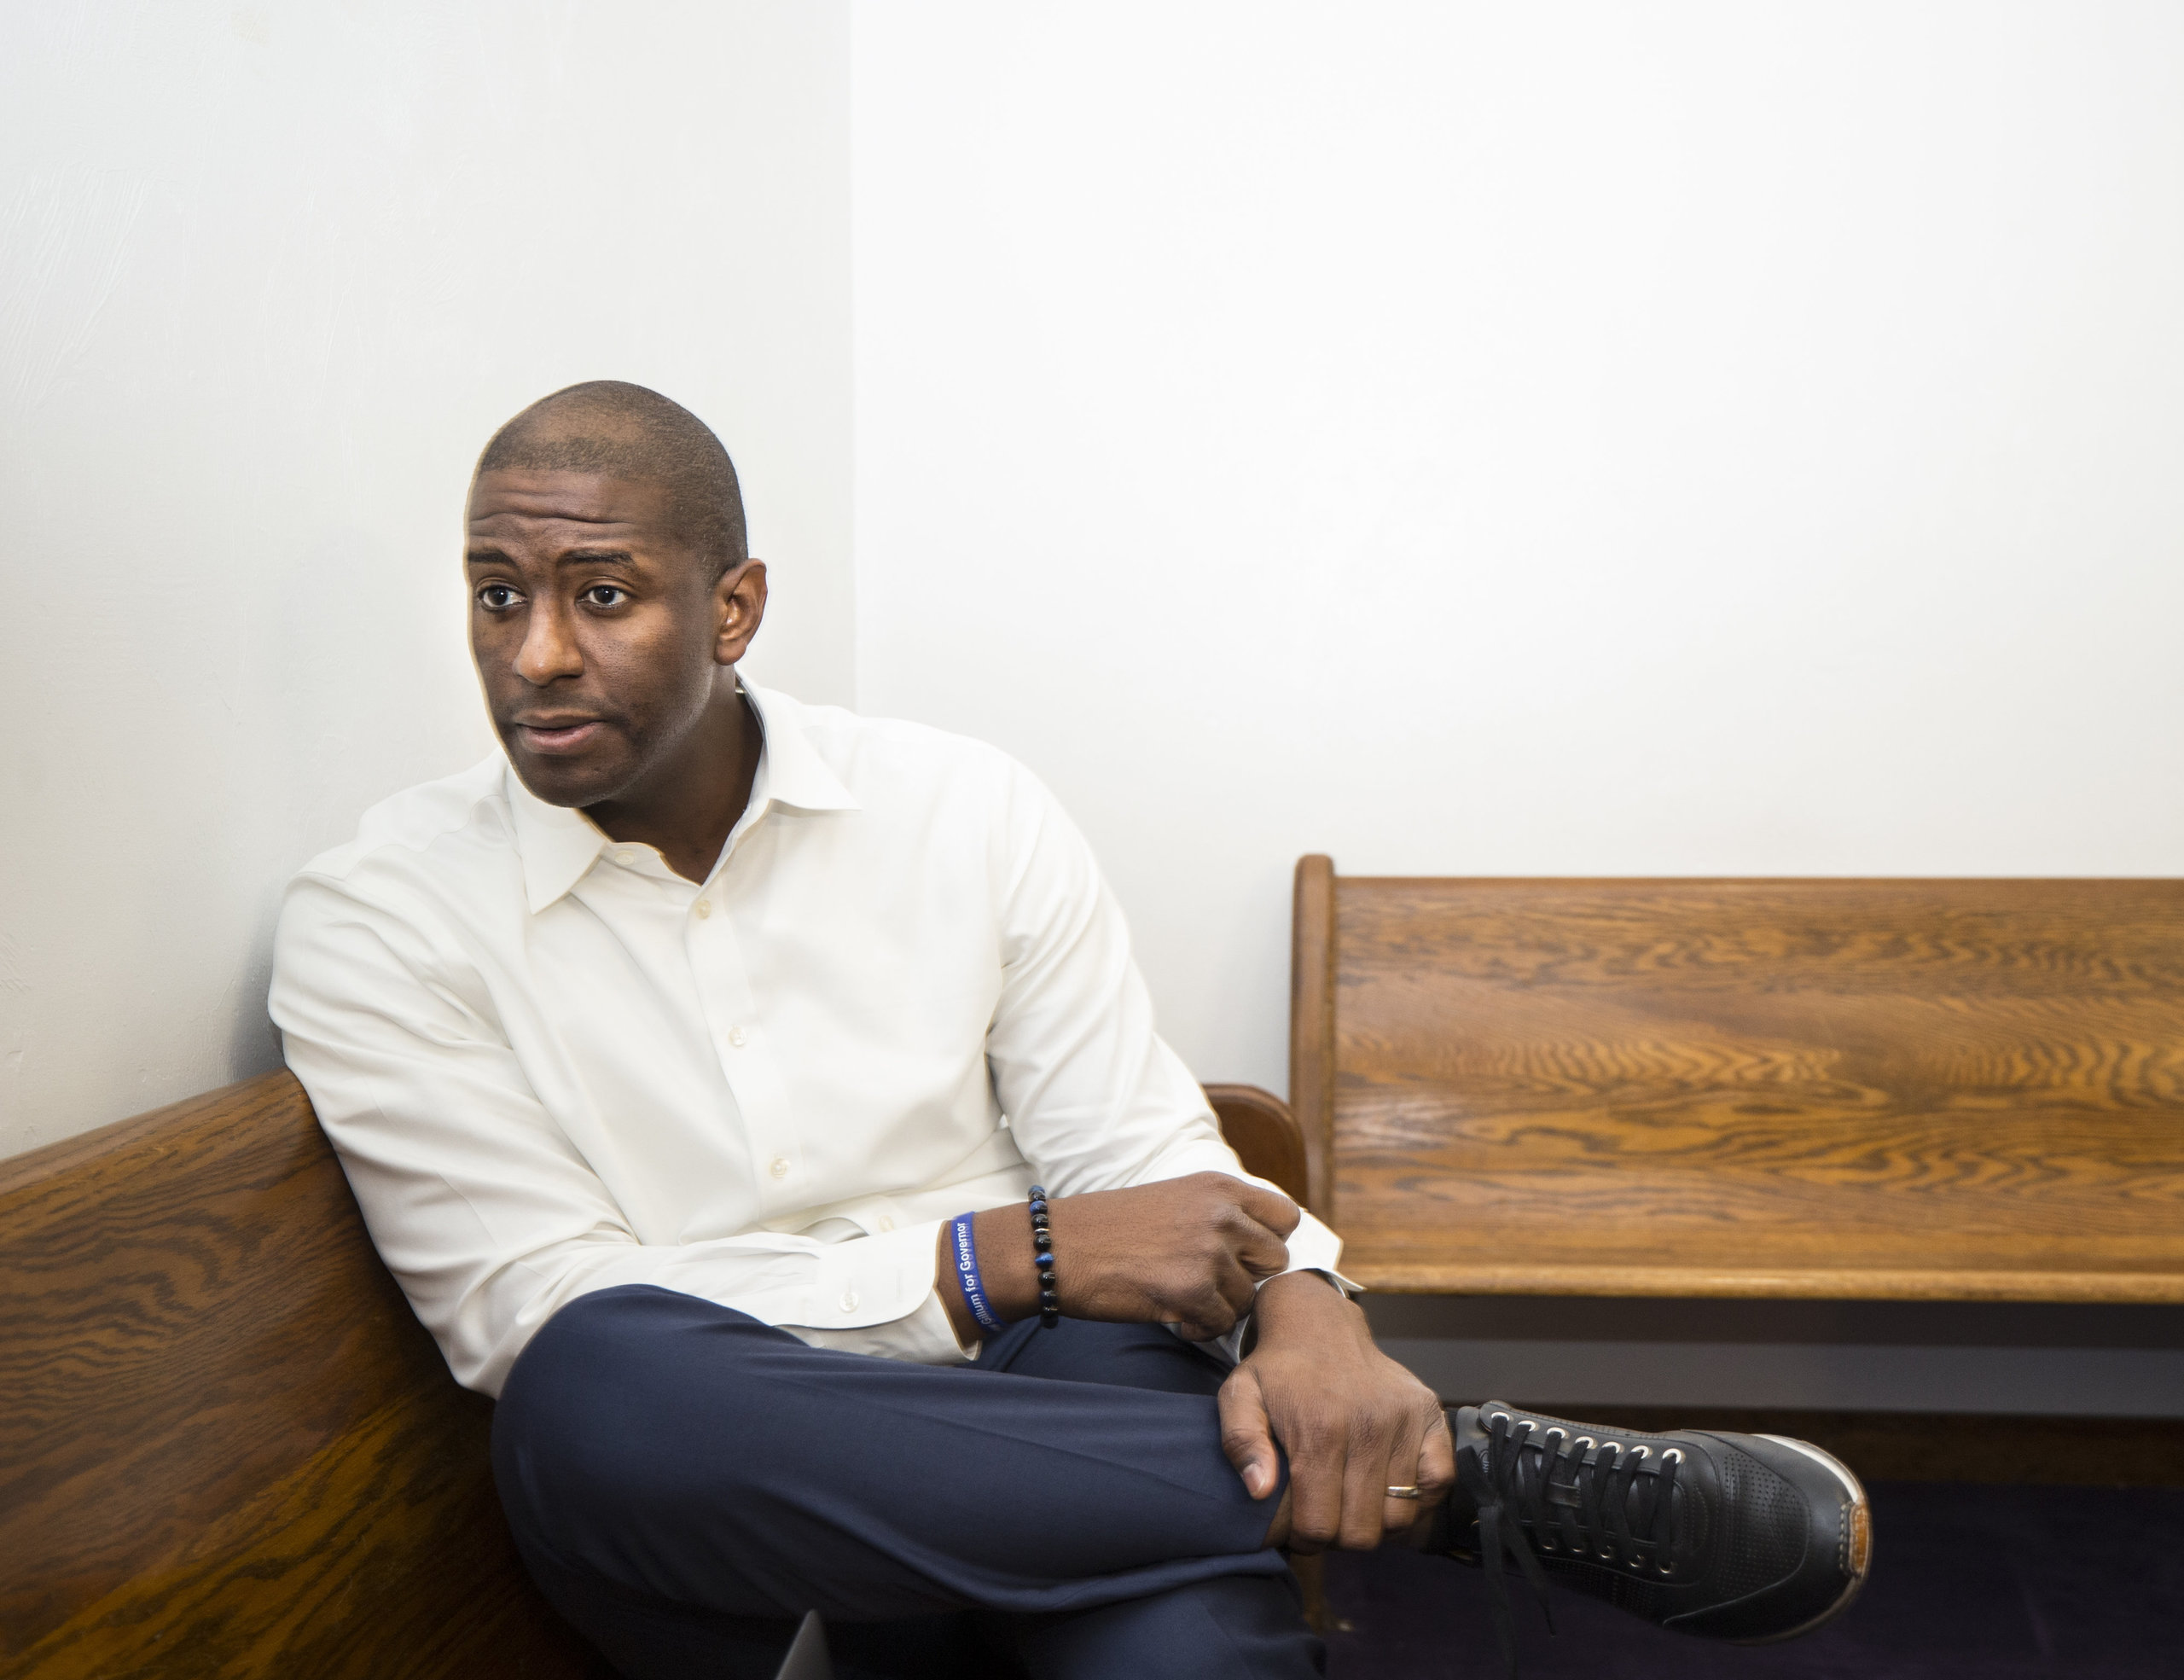 &ldquo;I don&rsquo;t think people are looking for perfect. They&rsquo;re looking for real,&rdquo; says Gillum.